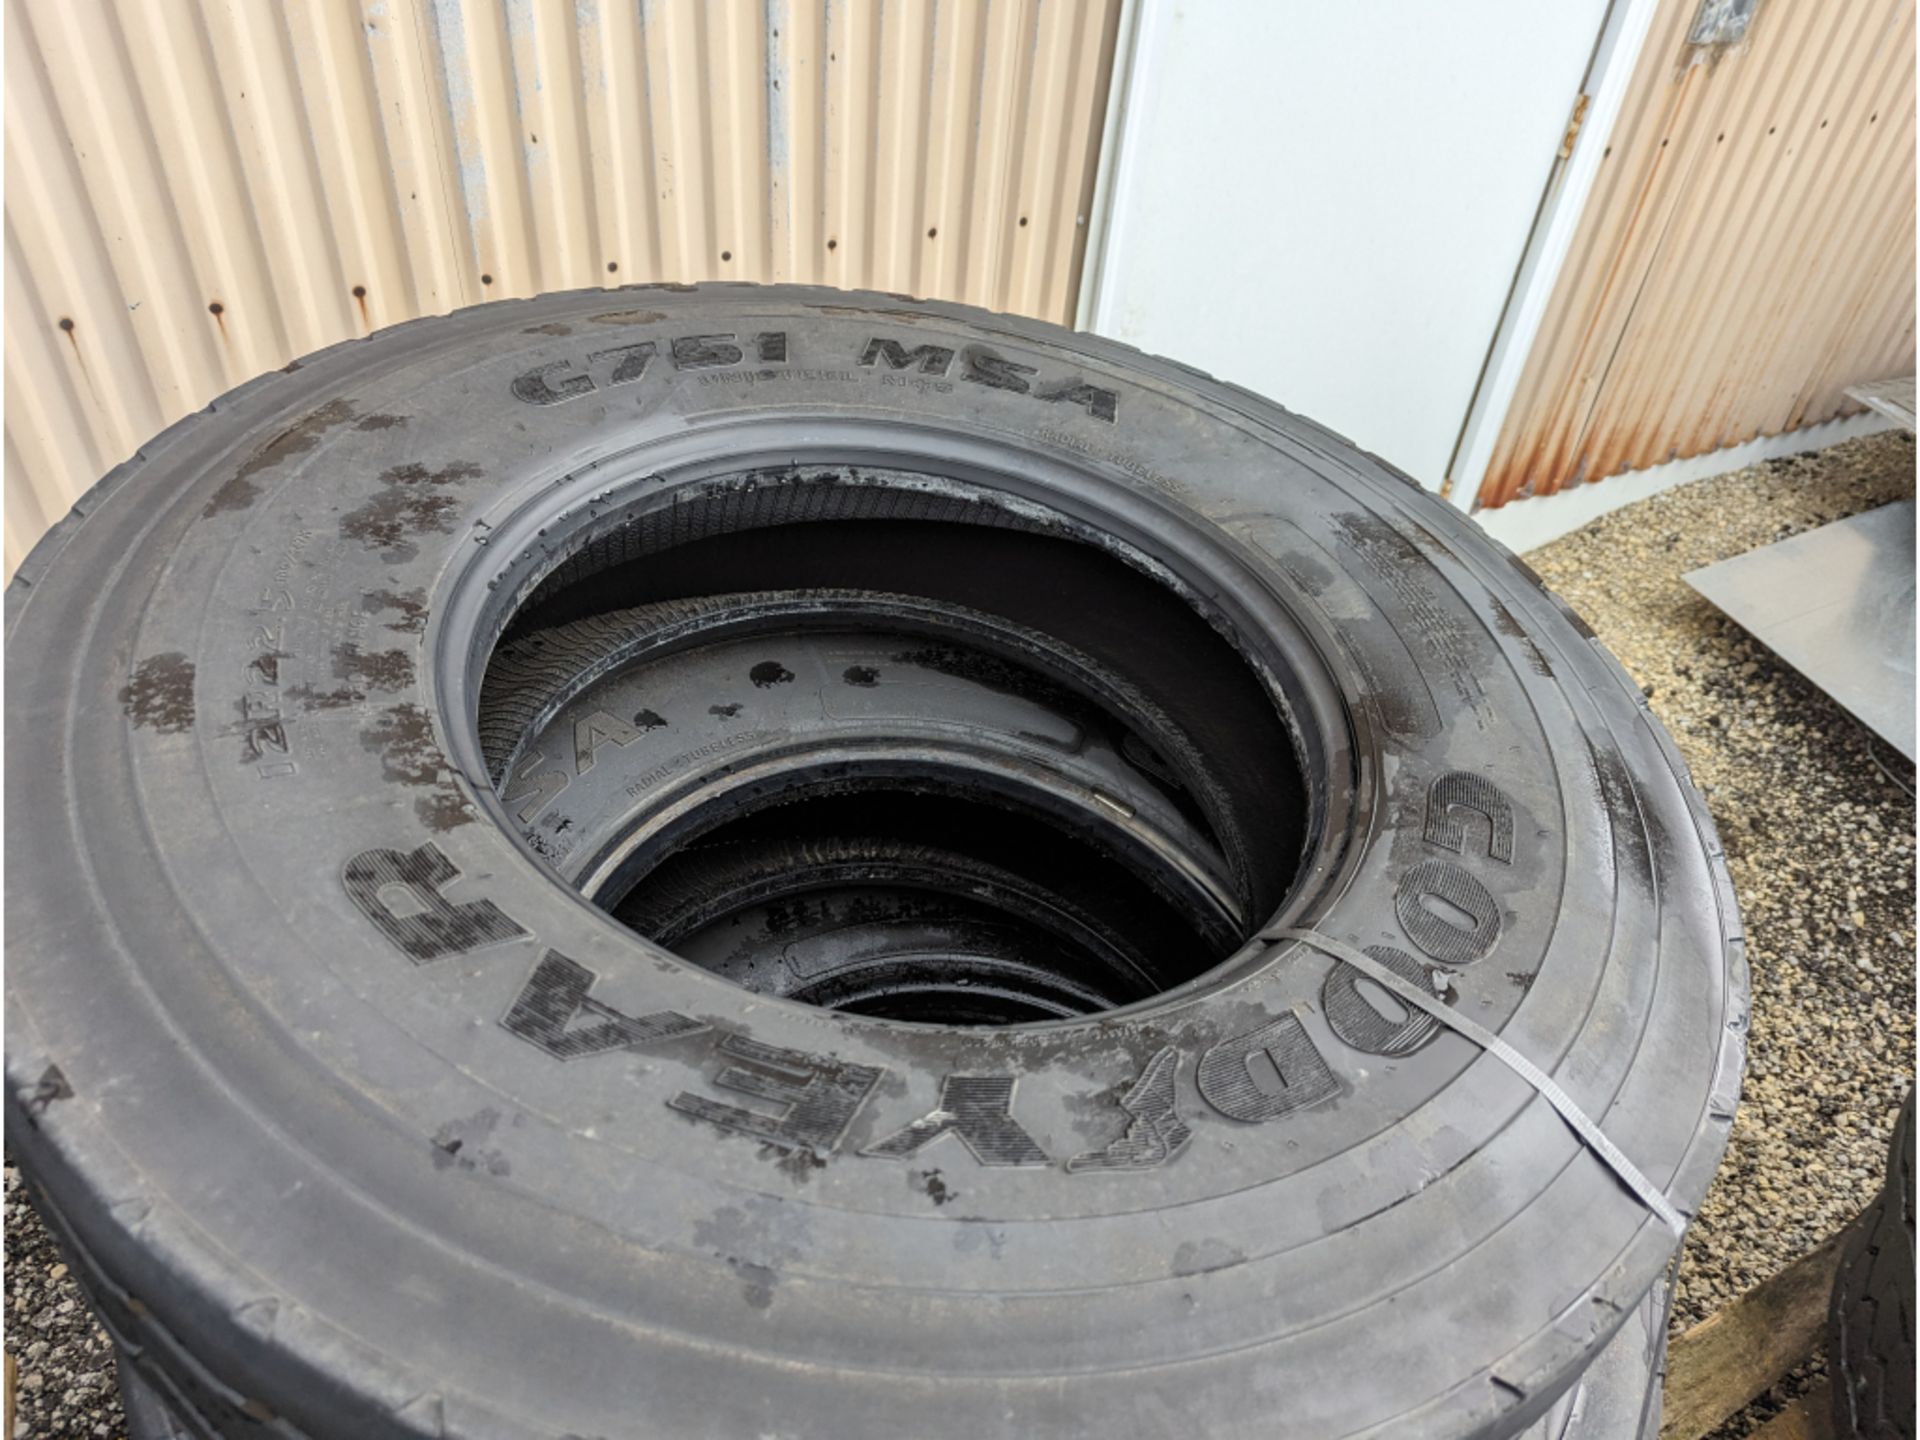 4 Goodyear G751 MSA 12R22.5 commercial truck tires USED Virgin Tread Surplus Take Off - Image 5 of 5